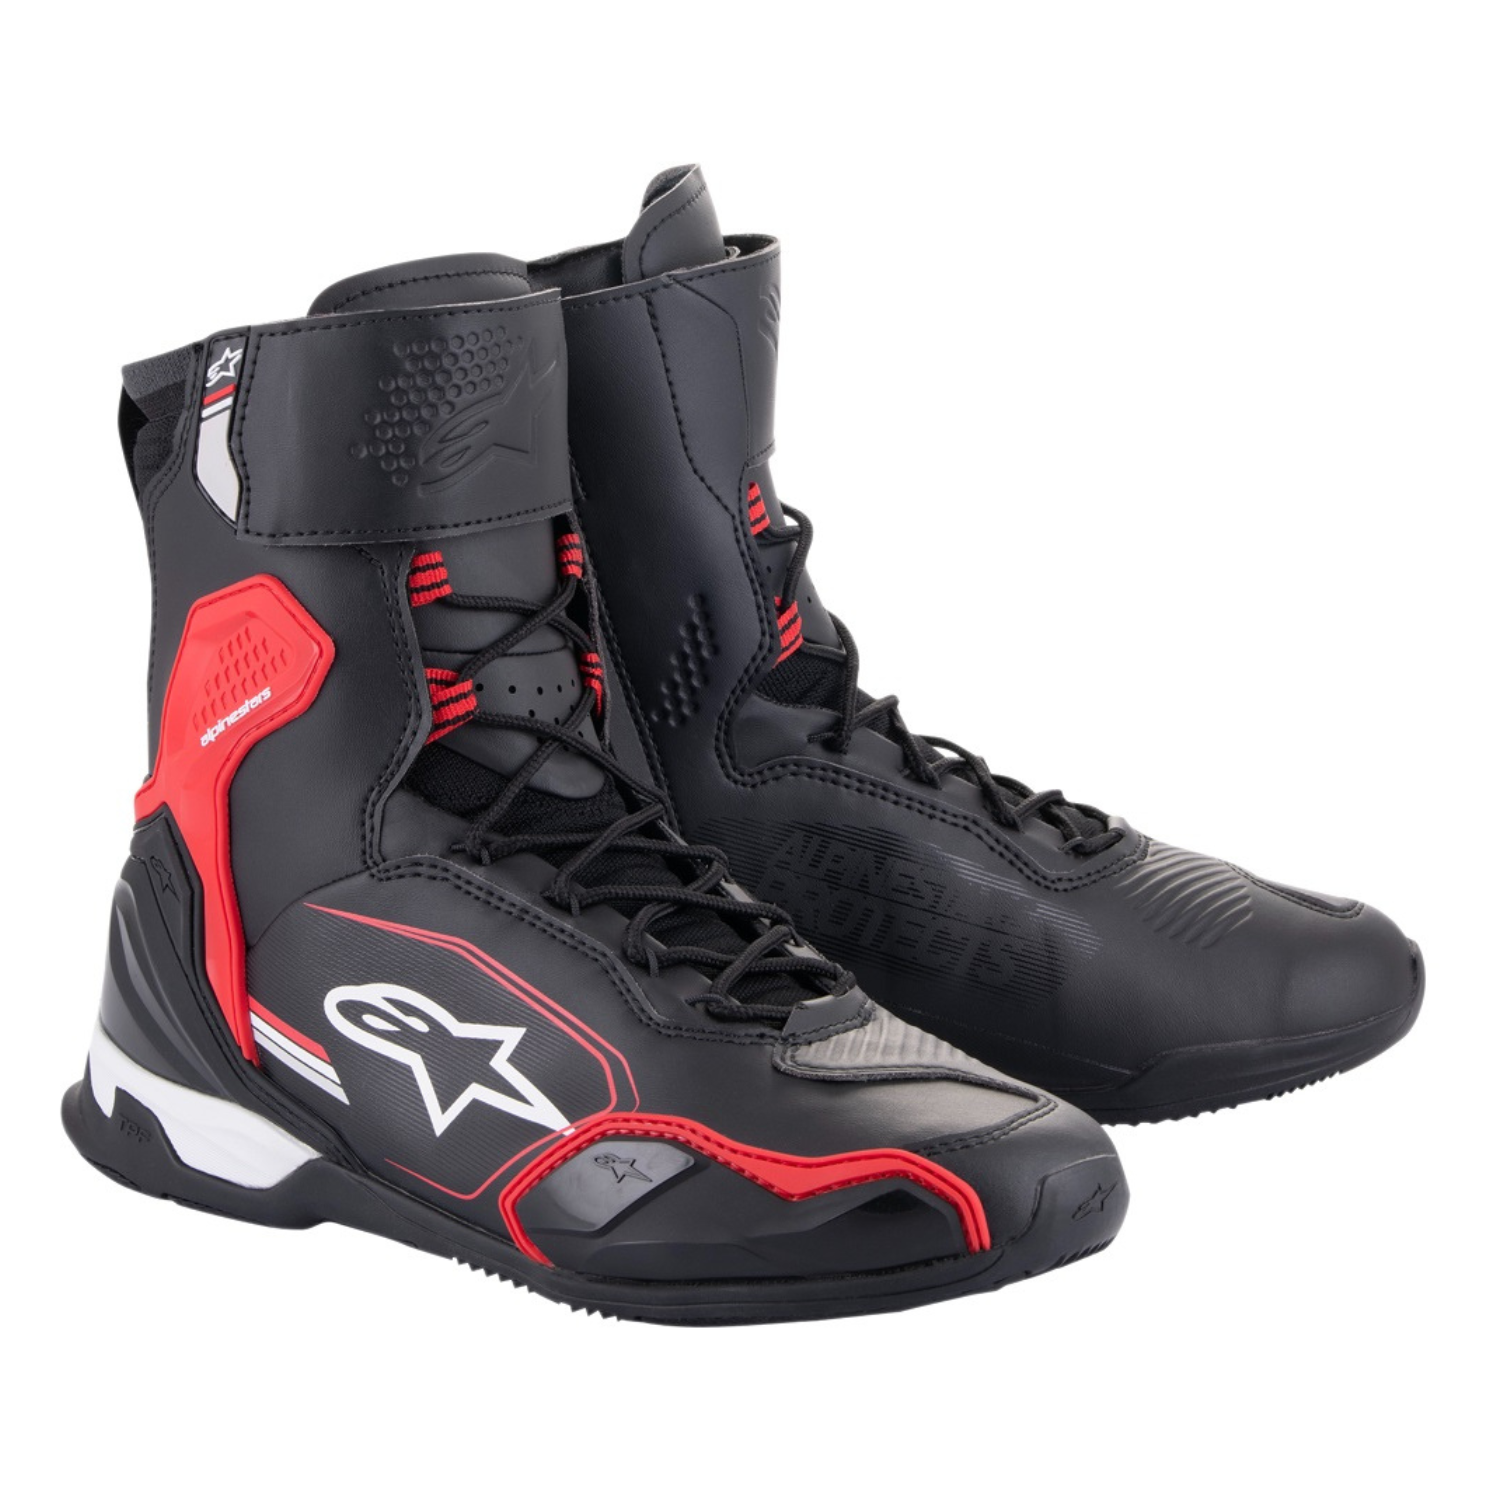 Image of EU Alpinestars Superfaster Shoes Black Bright Red White Taille US 10